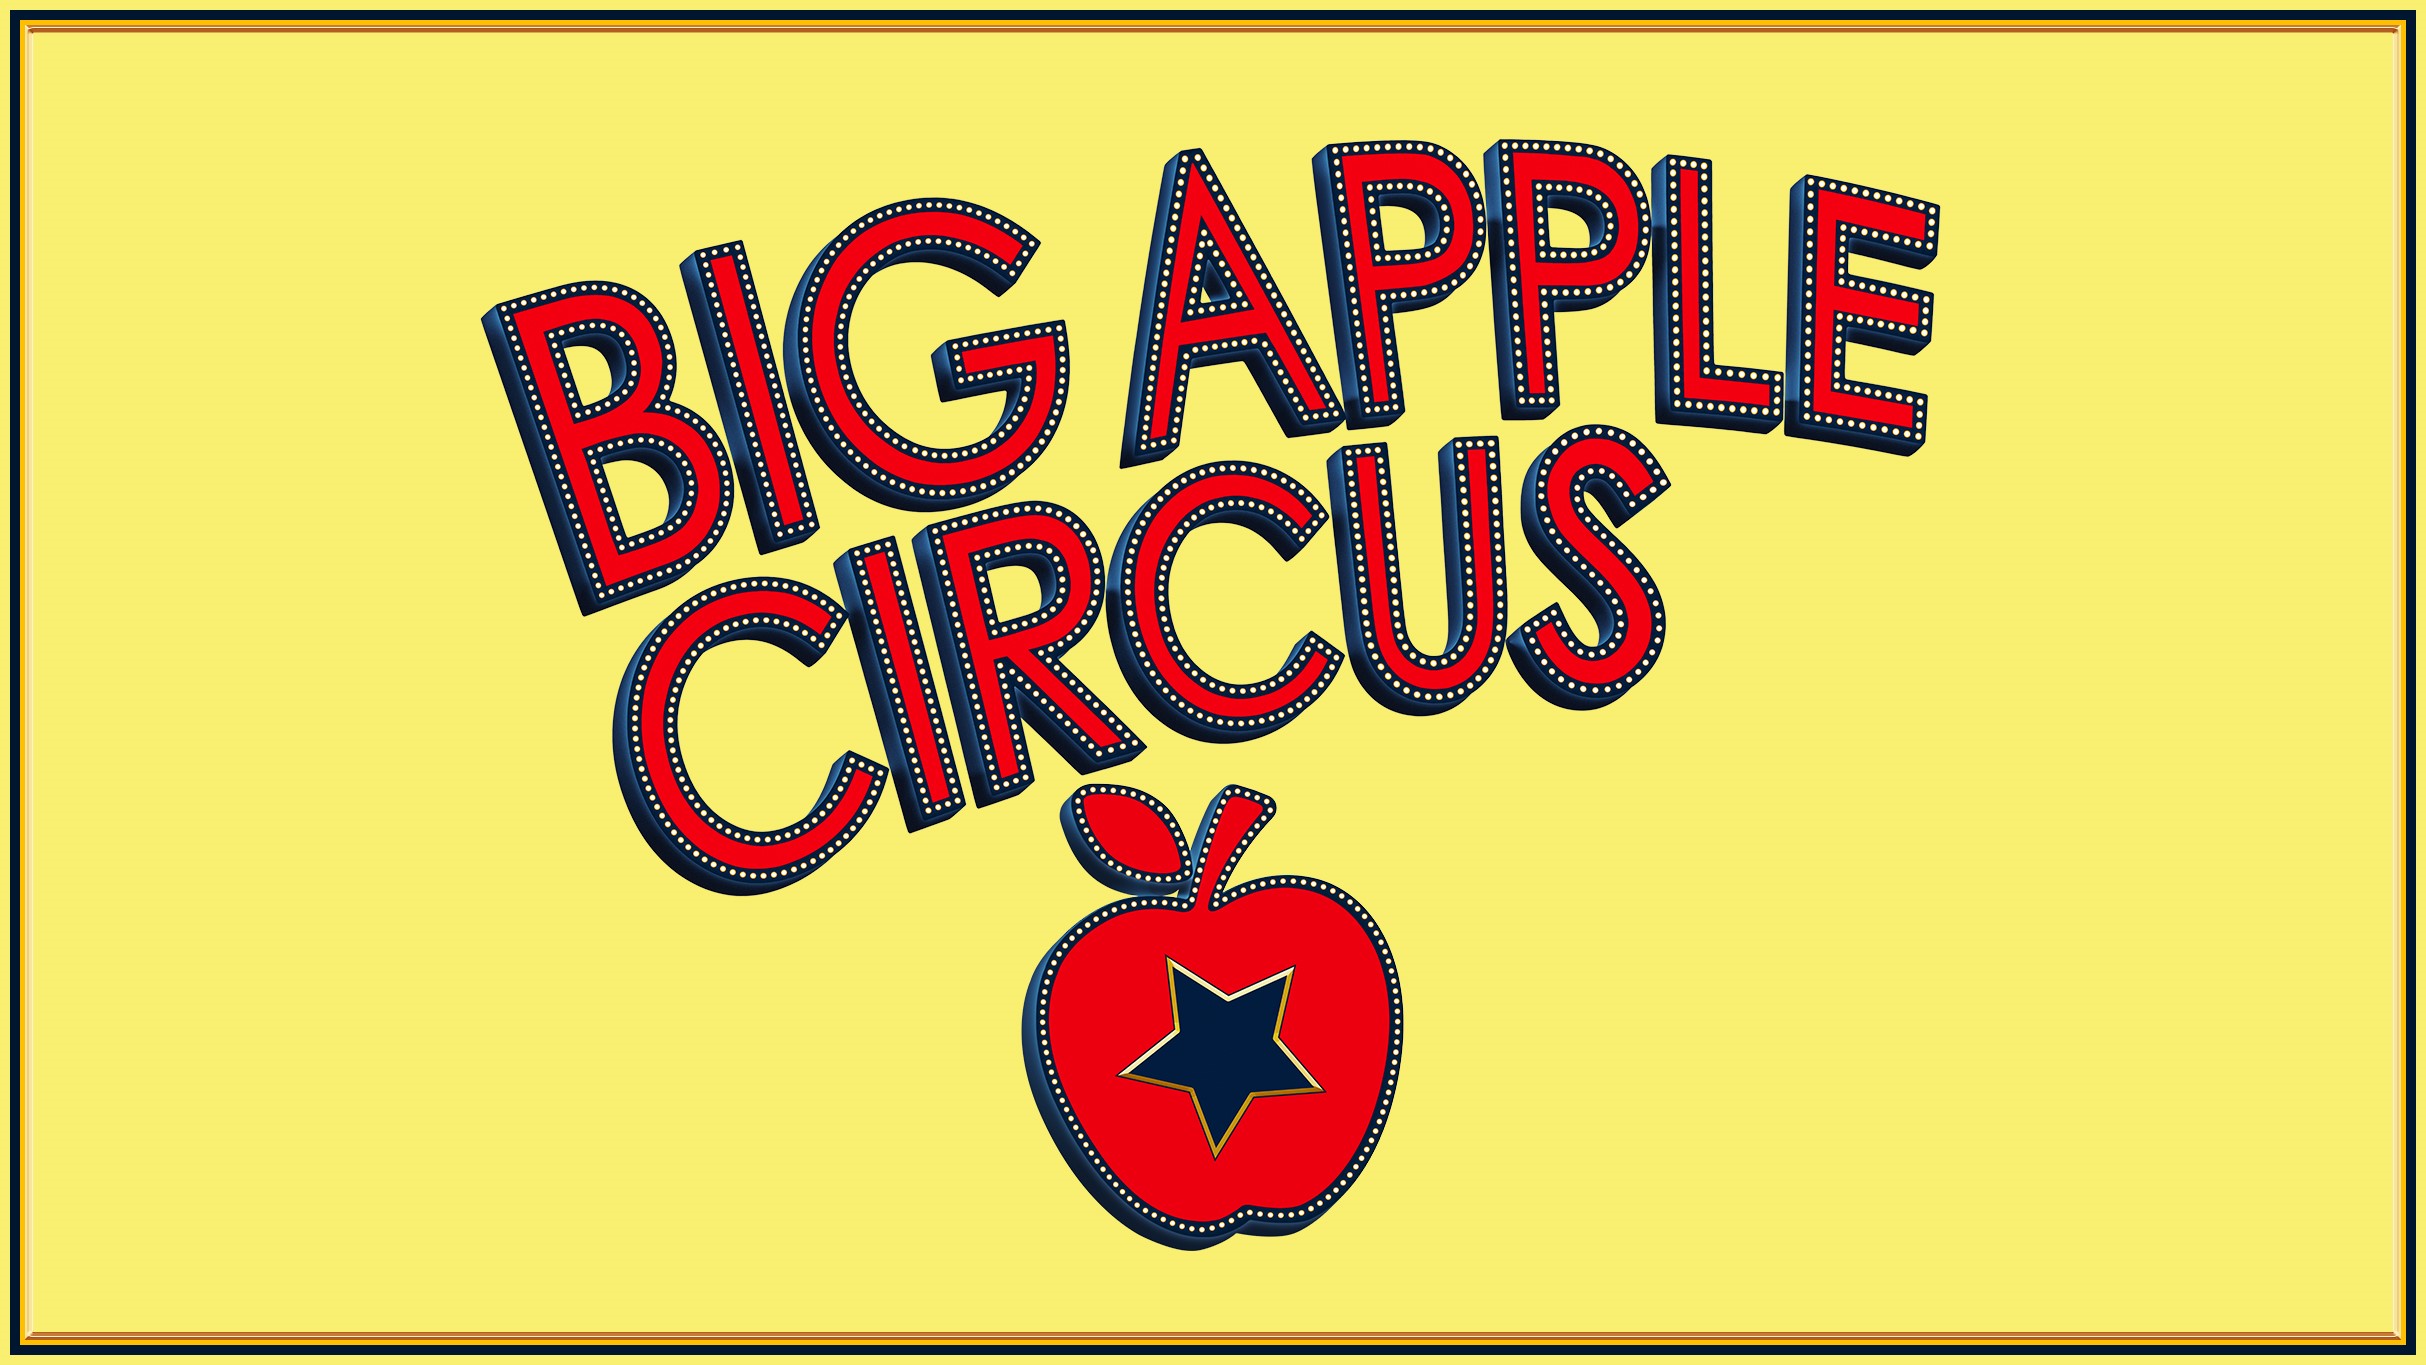 Big Apple Circus featured in Wednesday Matinee